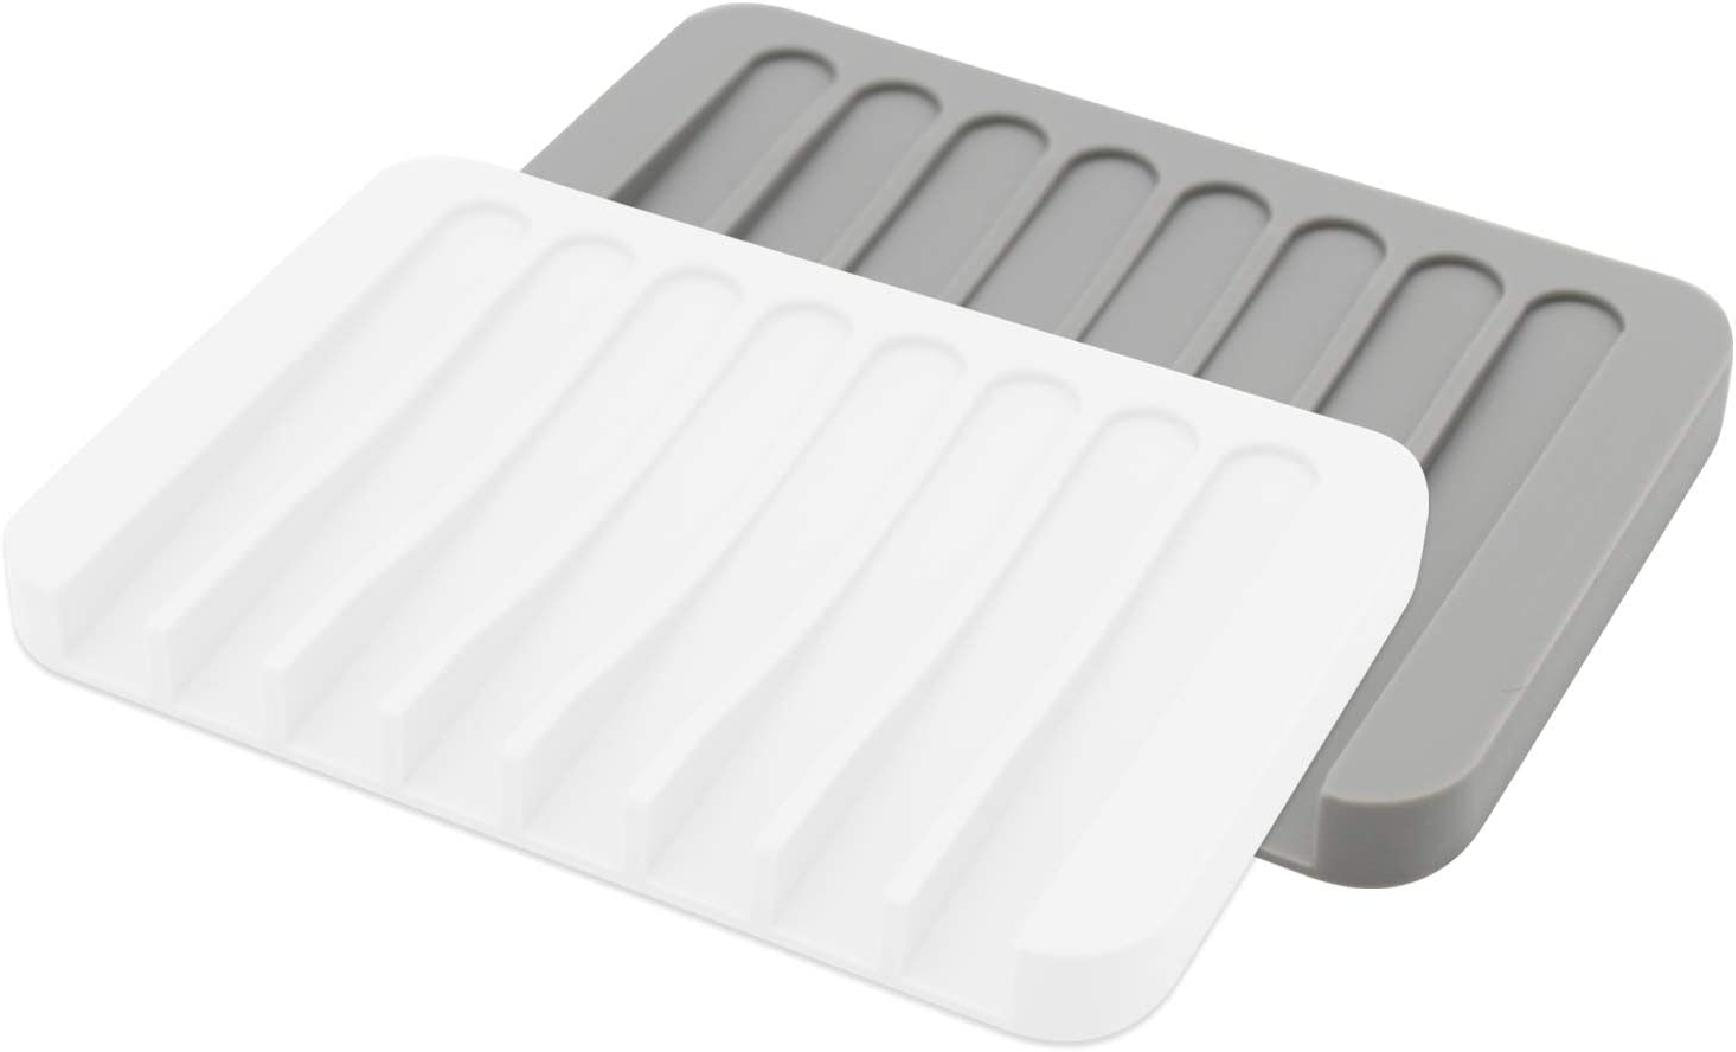 Silicone Kitchen Sink Tray Soap Dish Holder with Built-in Drain